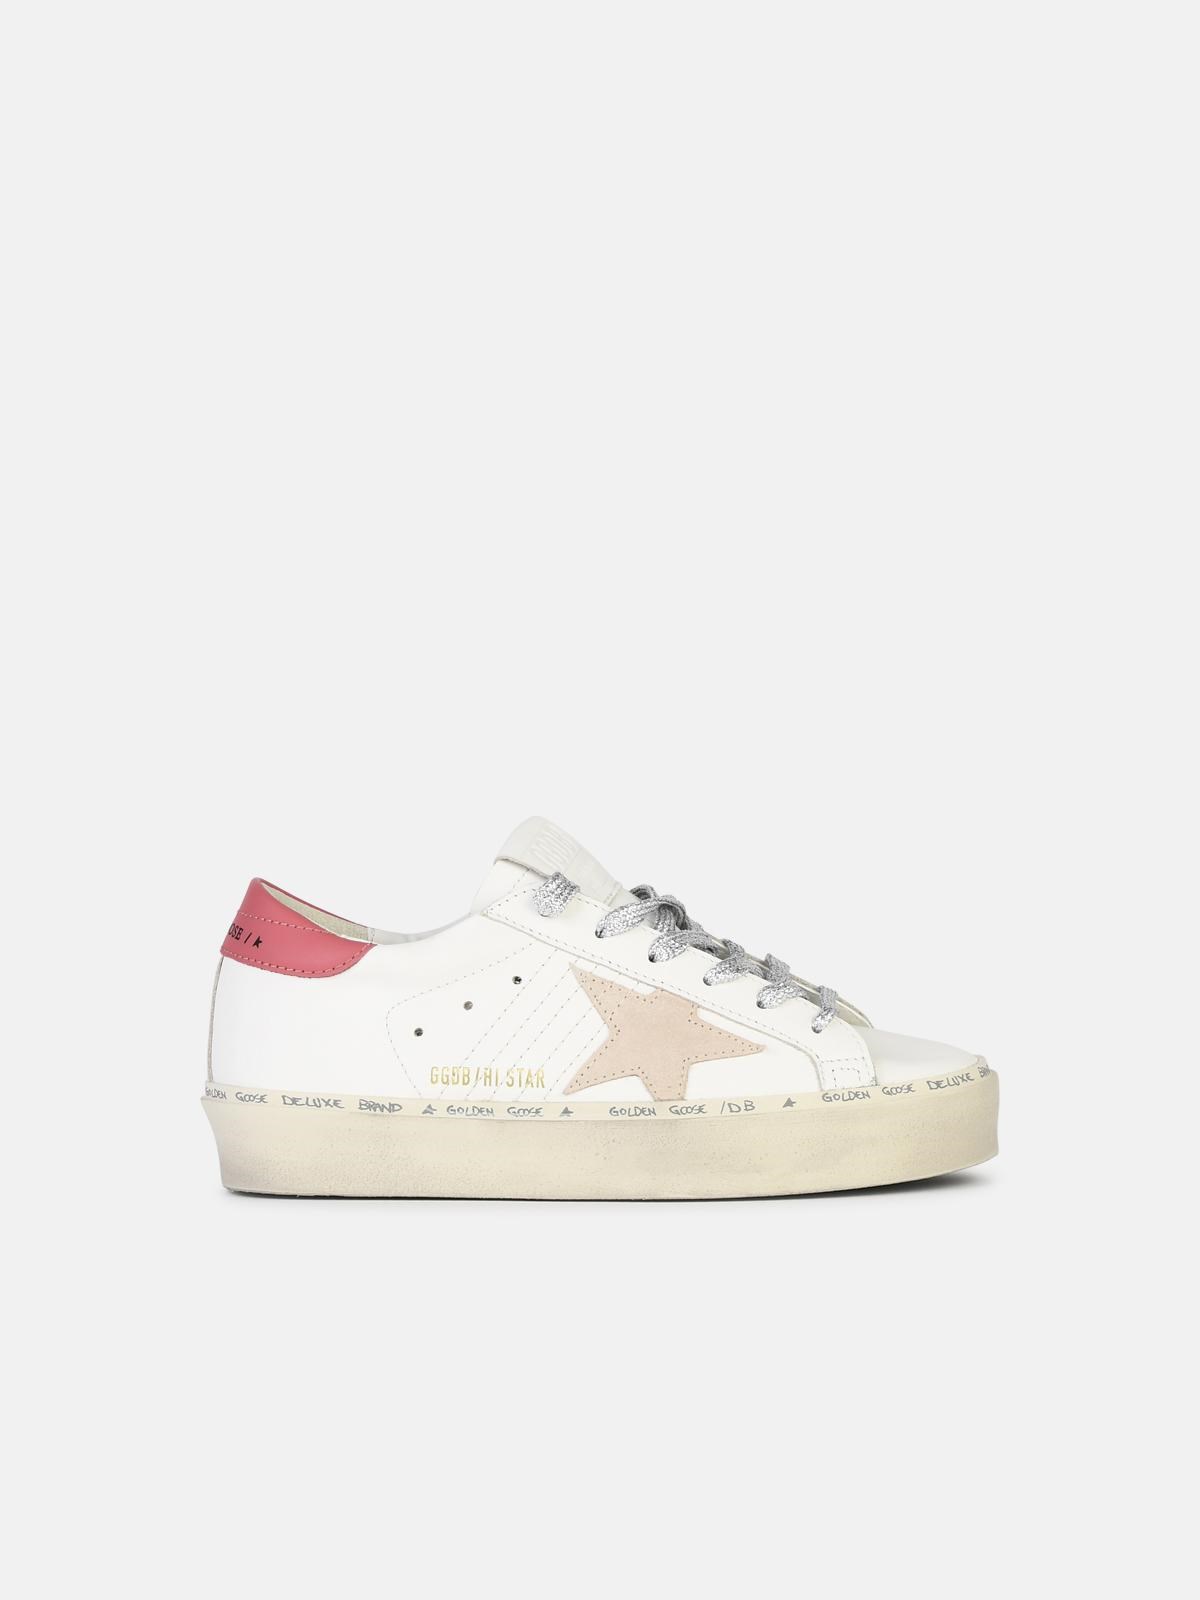 Shop Golden Goose 'hi Star' White Leather Sneakers